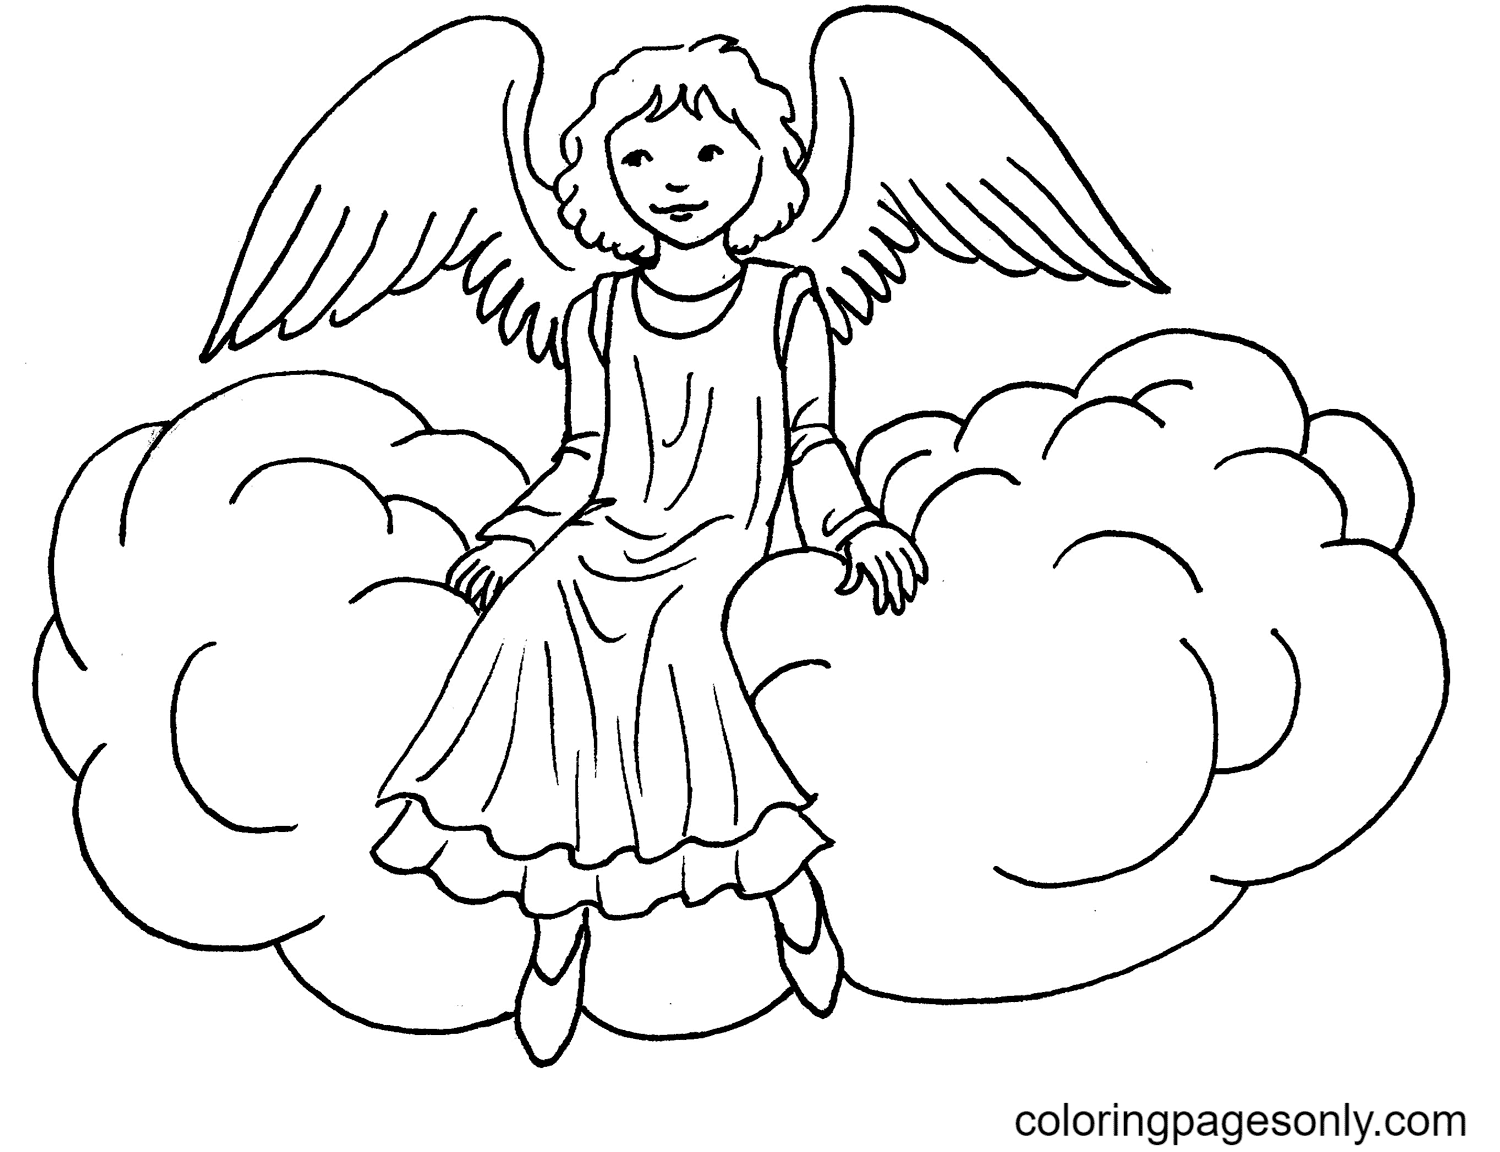 Angel Sitting on Cloud Coloring Page